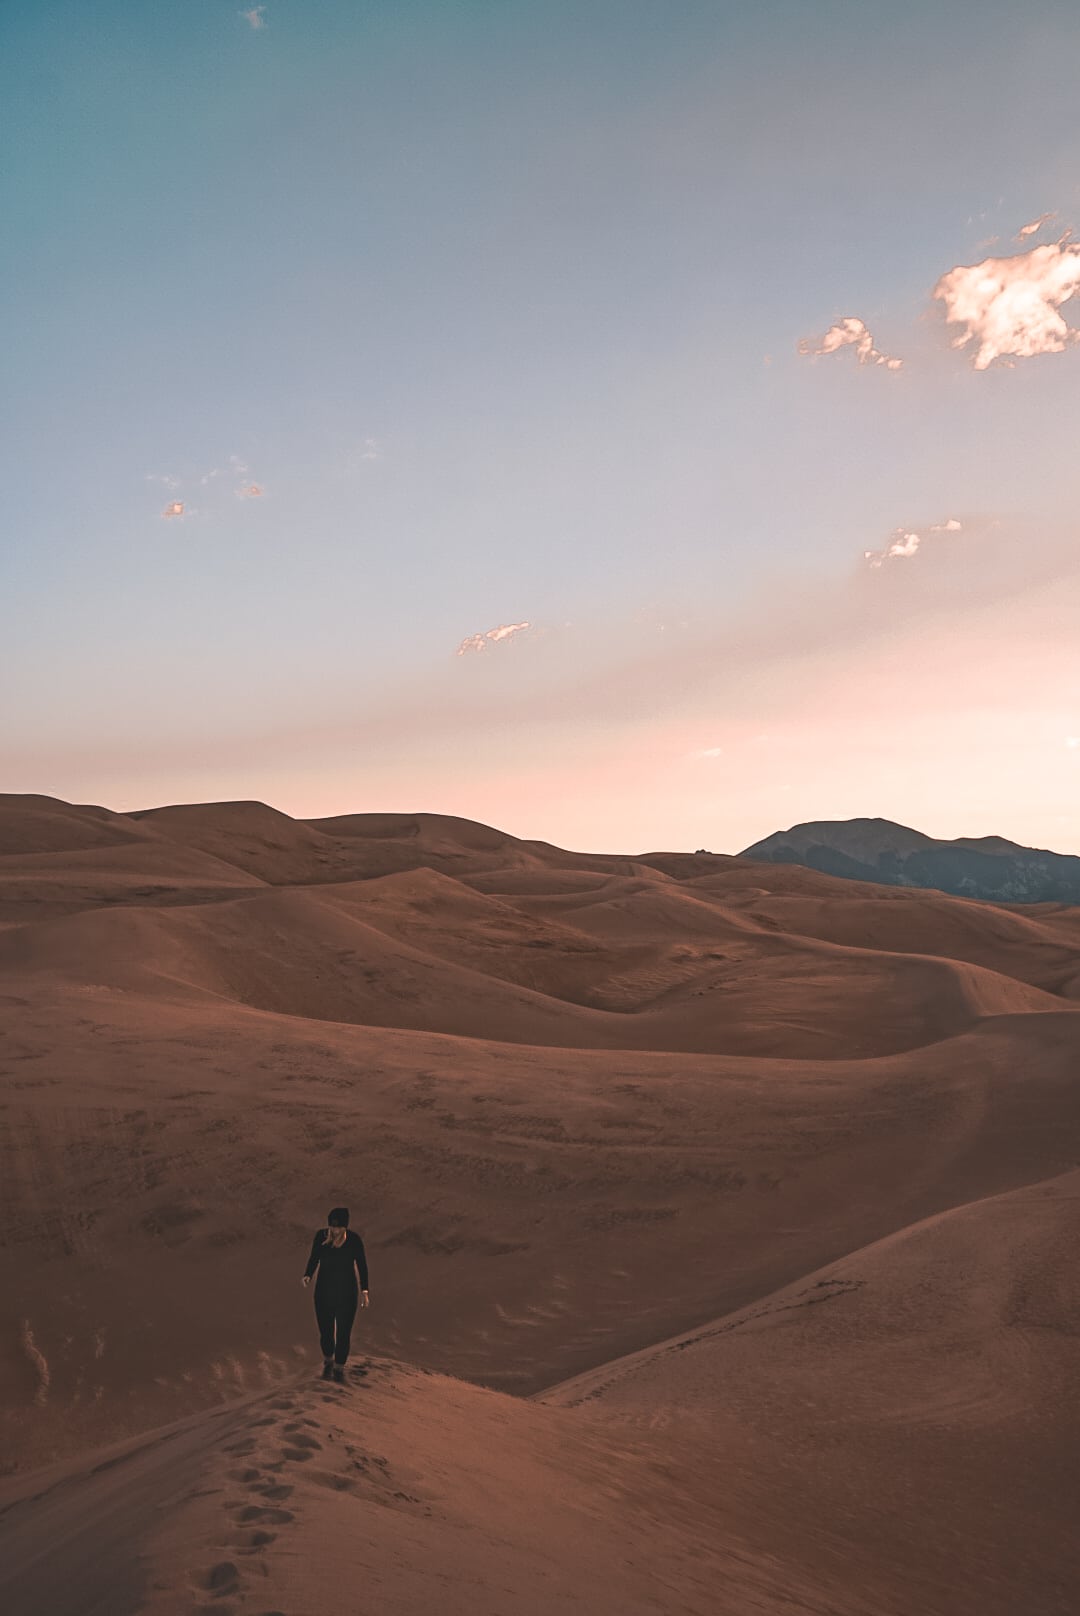 View of woman walking away onto a dune within the Great Sand Dunes during sunrise with the sky pastel pink and blue sky